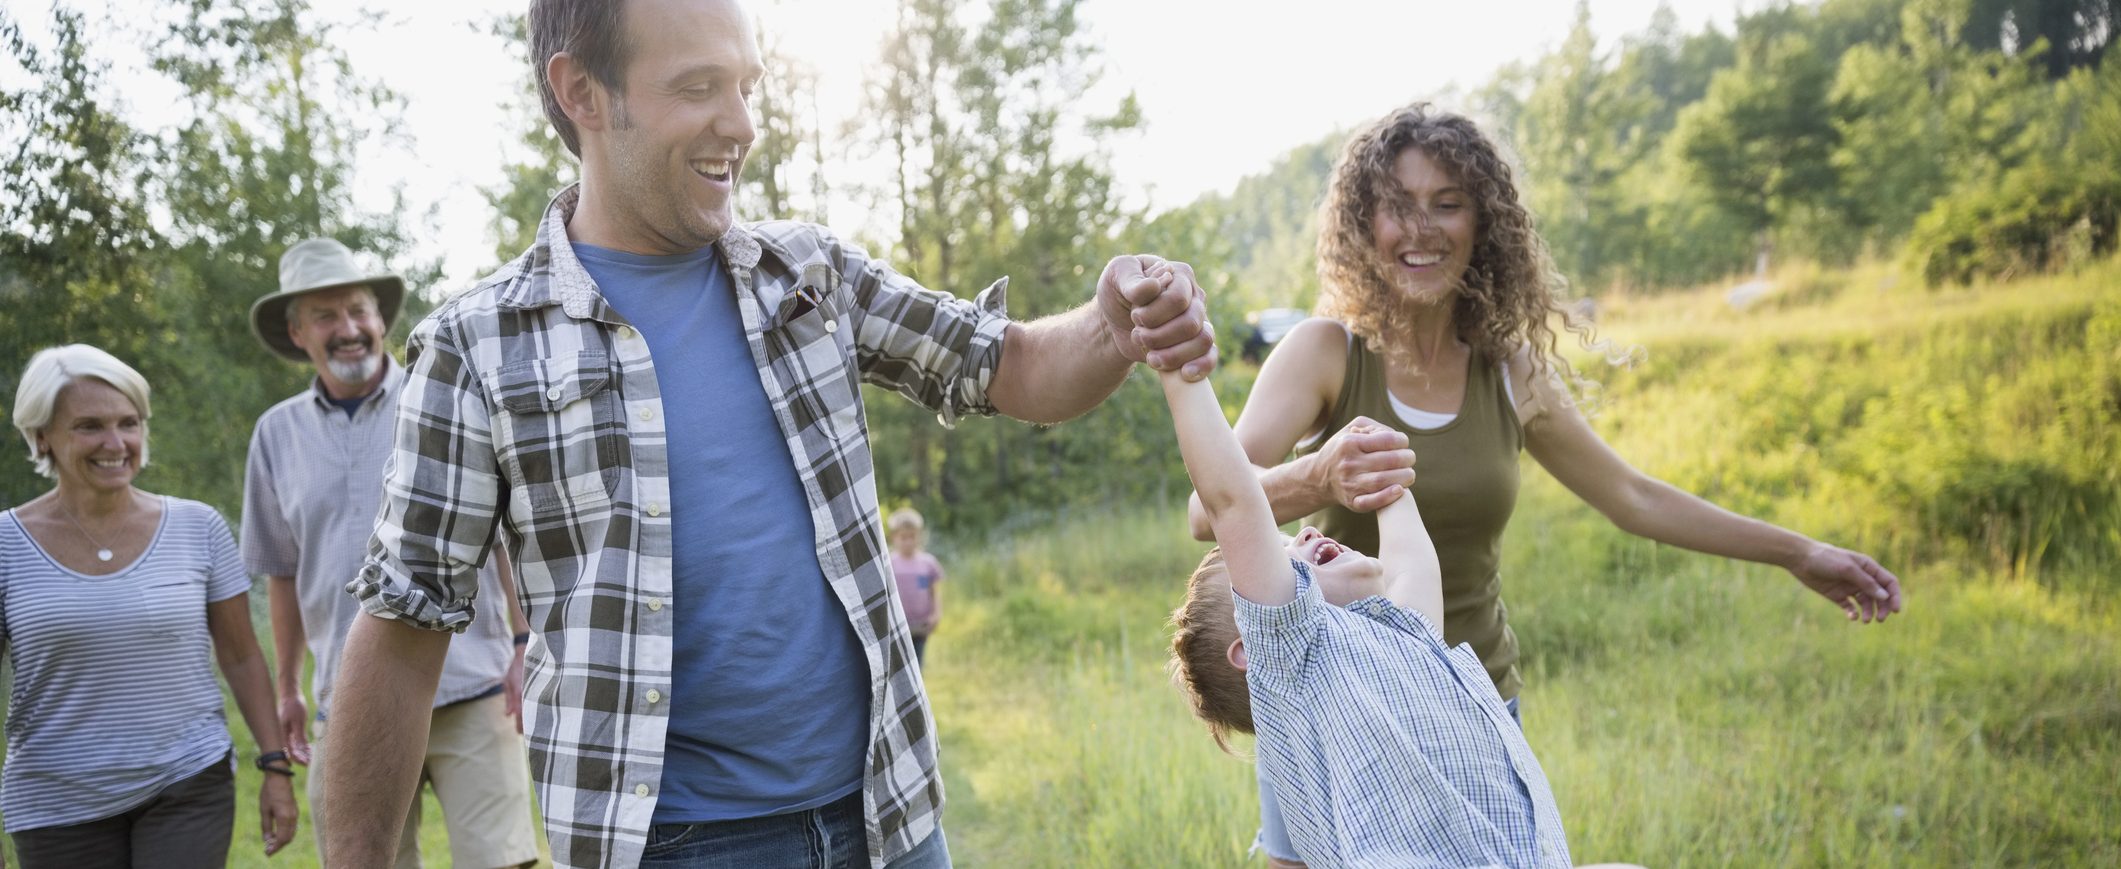 Young parents are free to spend the day with family without worrying about their emergency savings